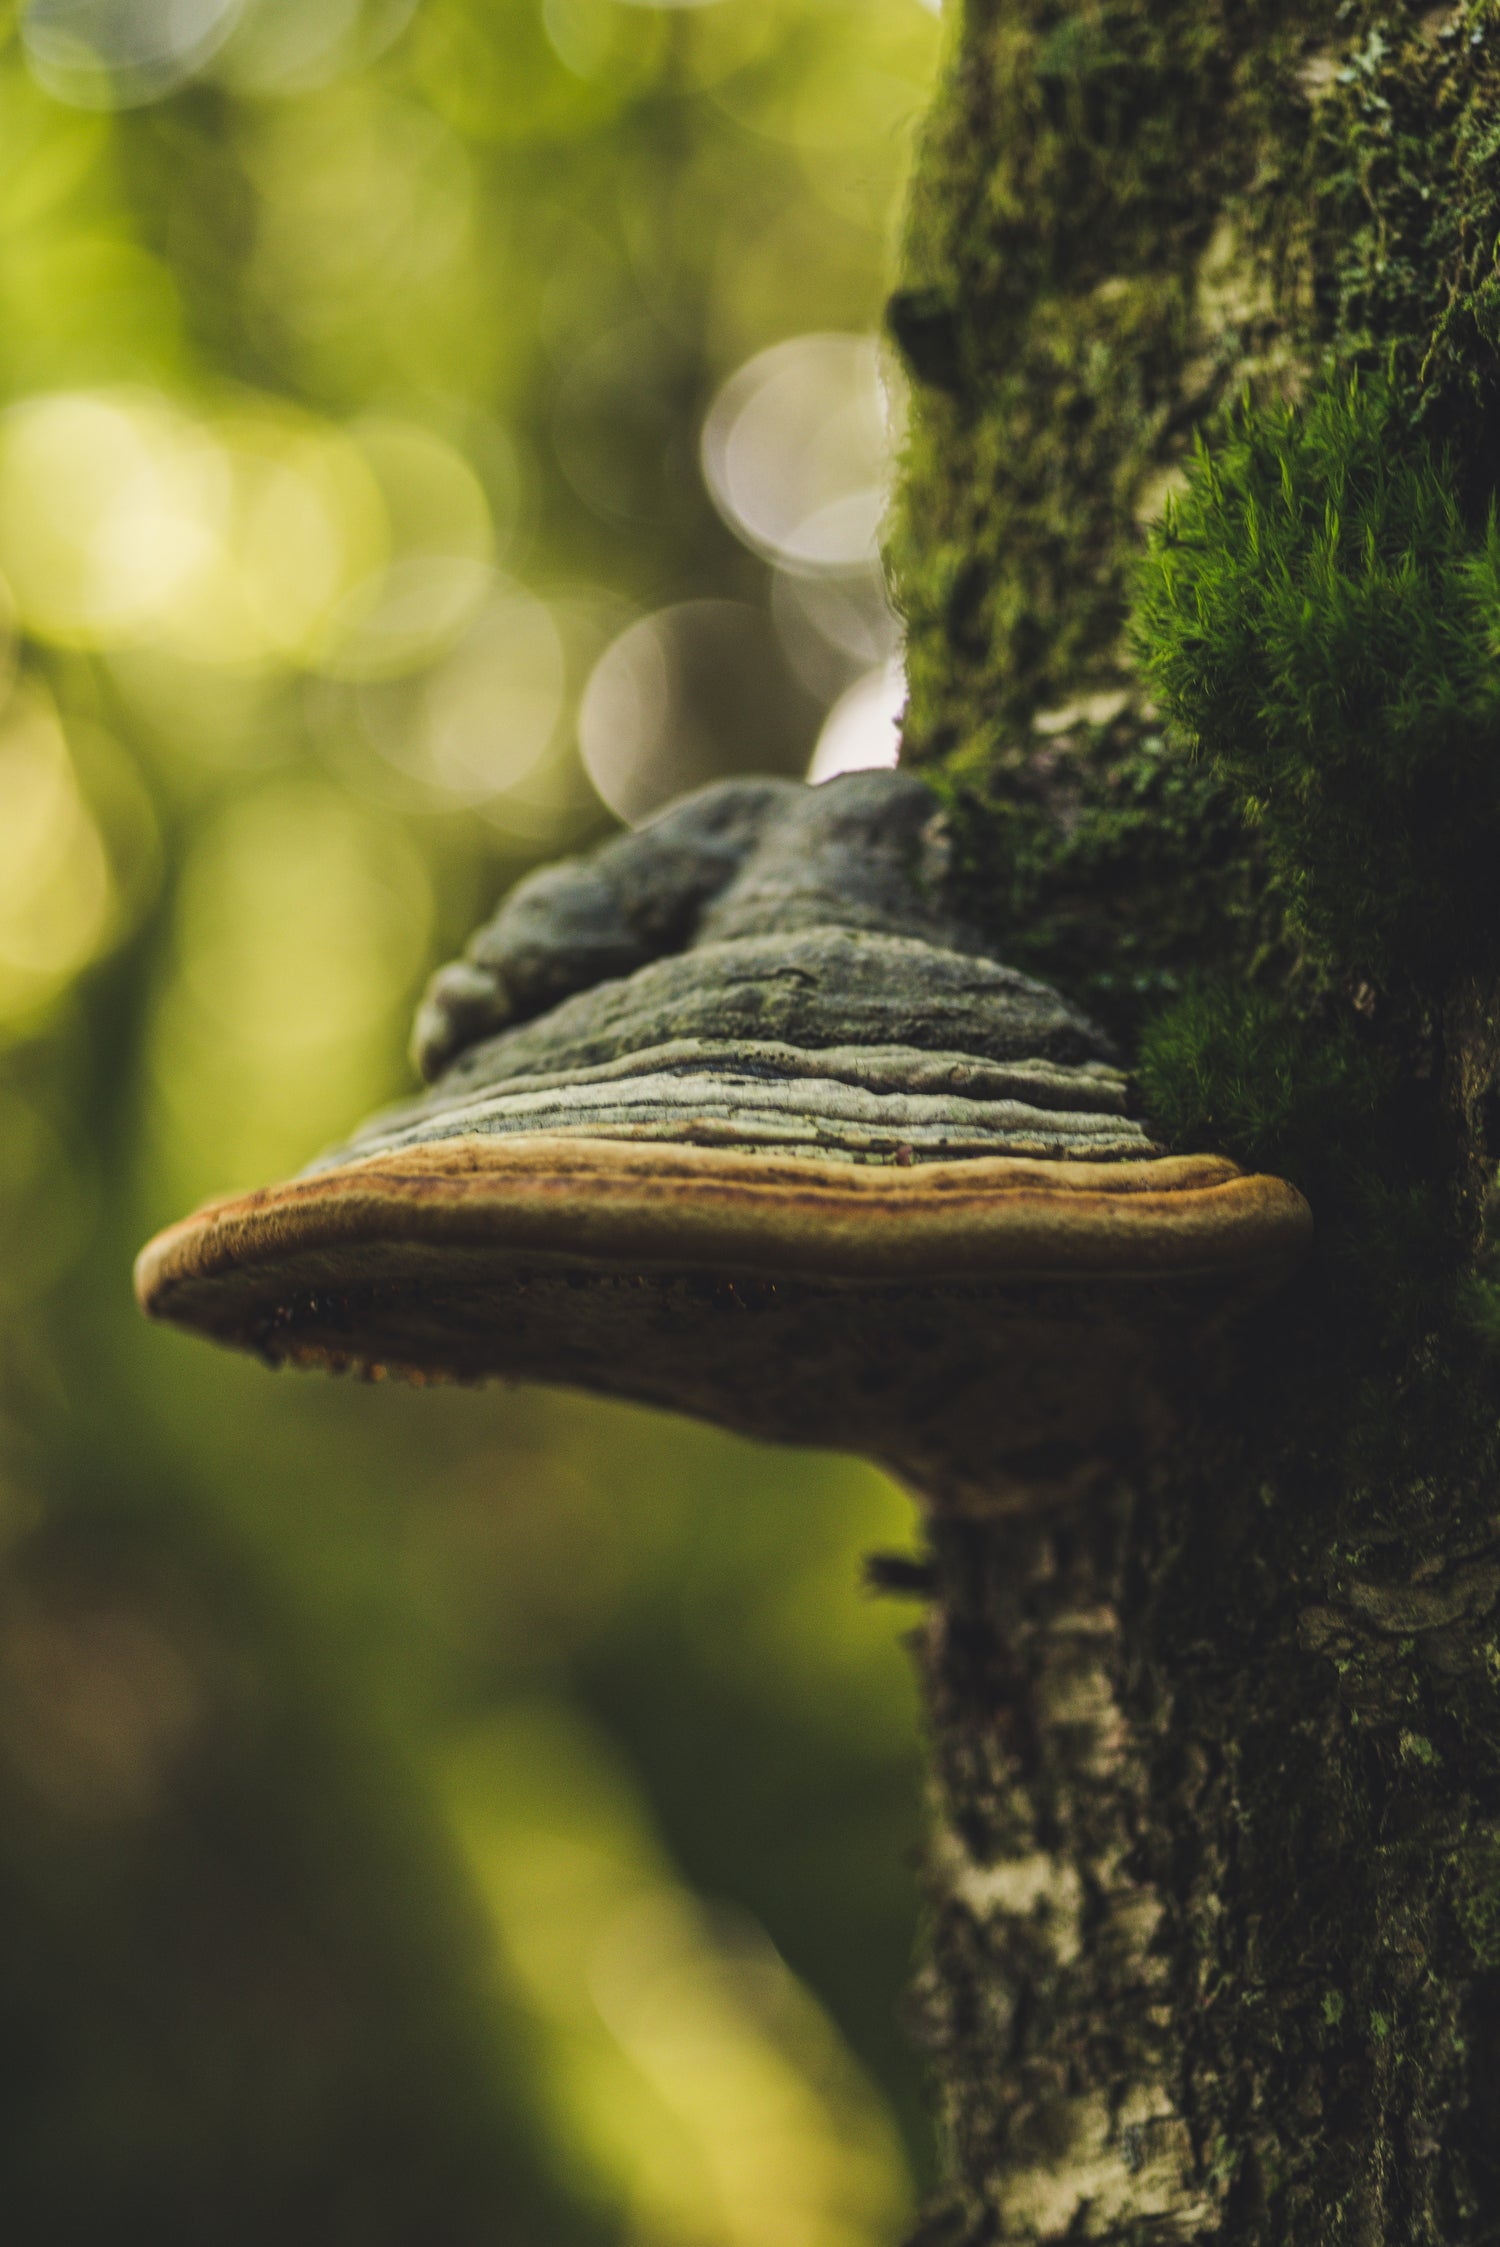 Fomes fomentarius also known as hoof mushrooms on a tree in a forest